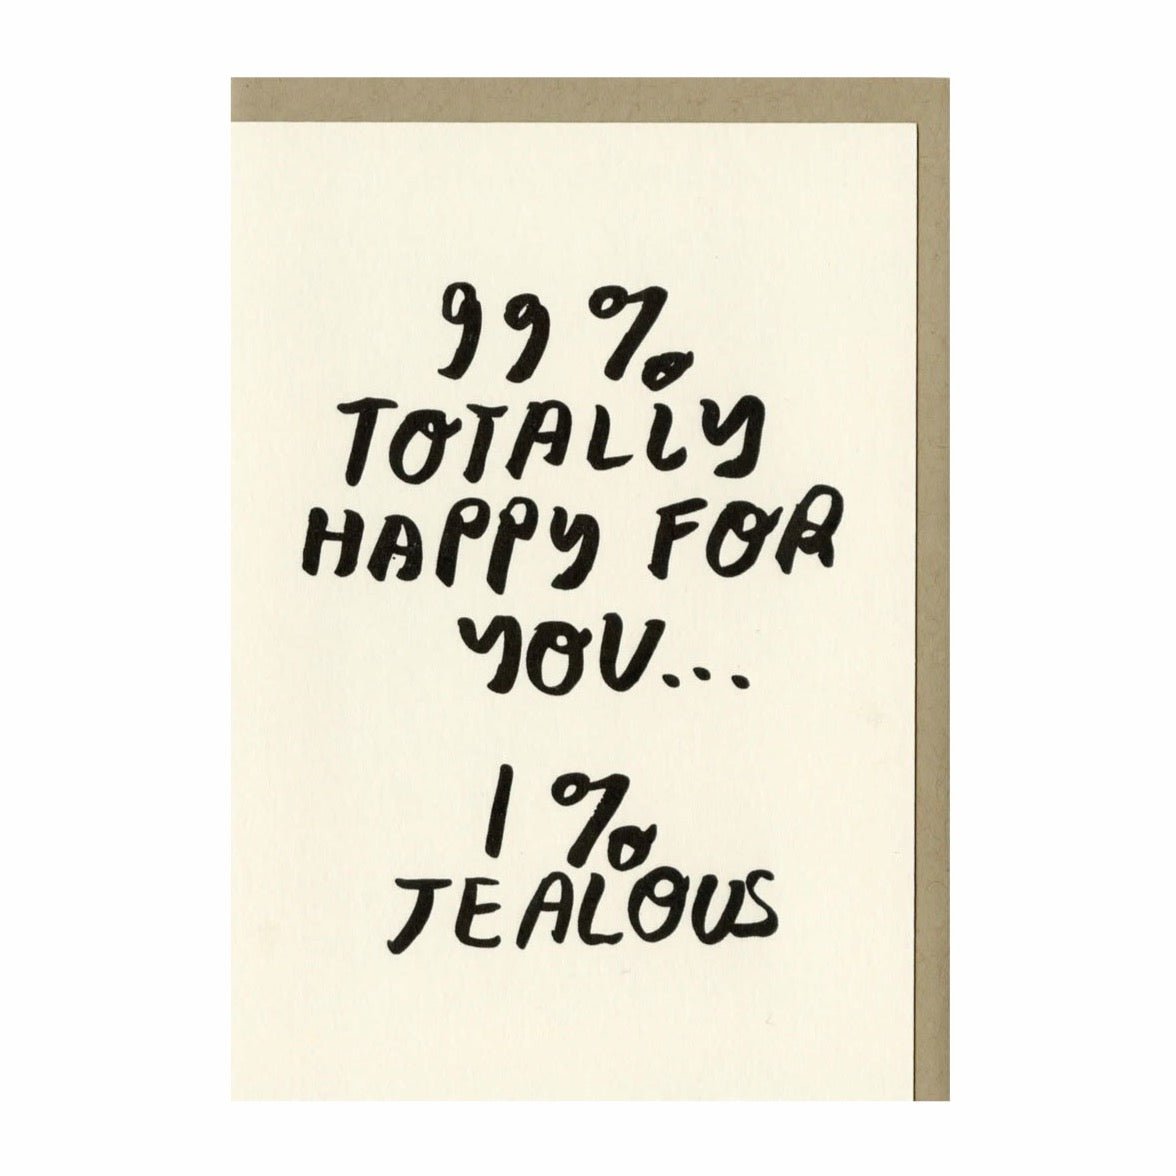 Letterpress printed greeting card reads "99% TOTALLY HAPPY FOR YOU...1% JEALOUS." Comes with brown kraft paper envelope. Printed in Oakland, California by People I've Loved.